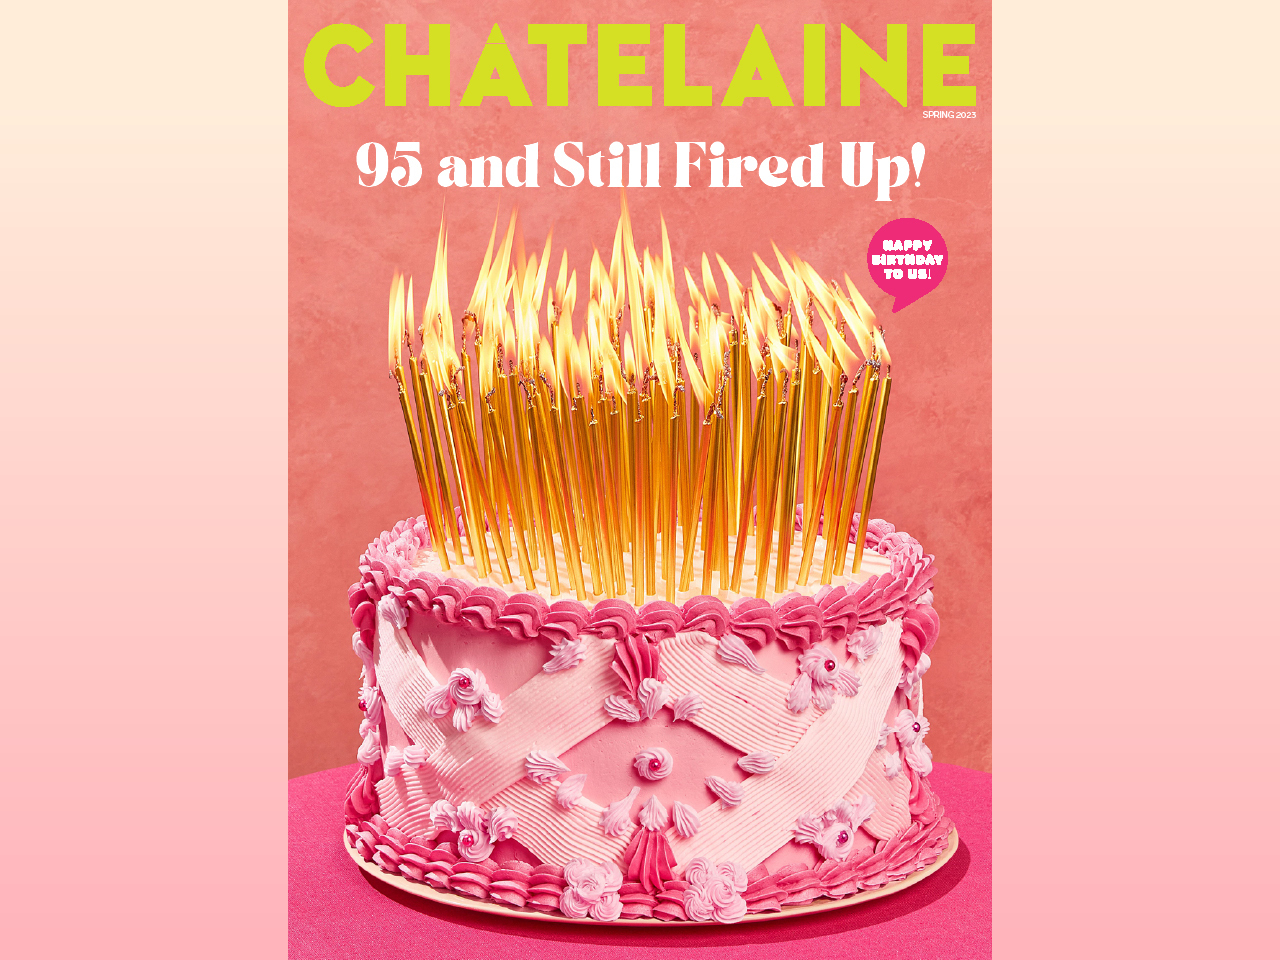 A photo of a pink Chatelaine cover with a birthday cake with 95 lit candles.